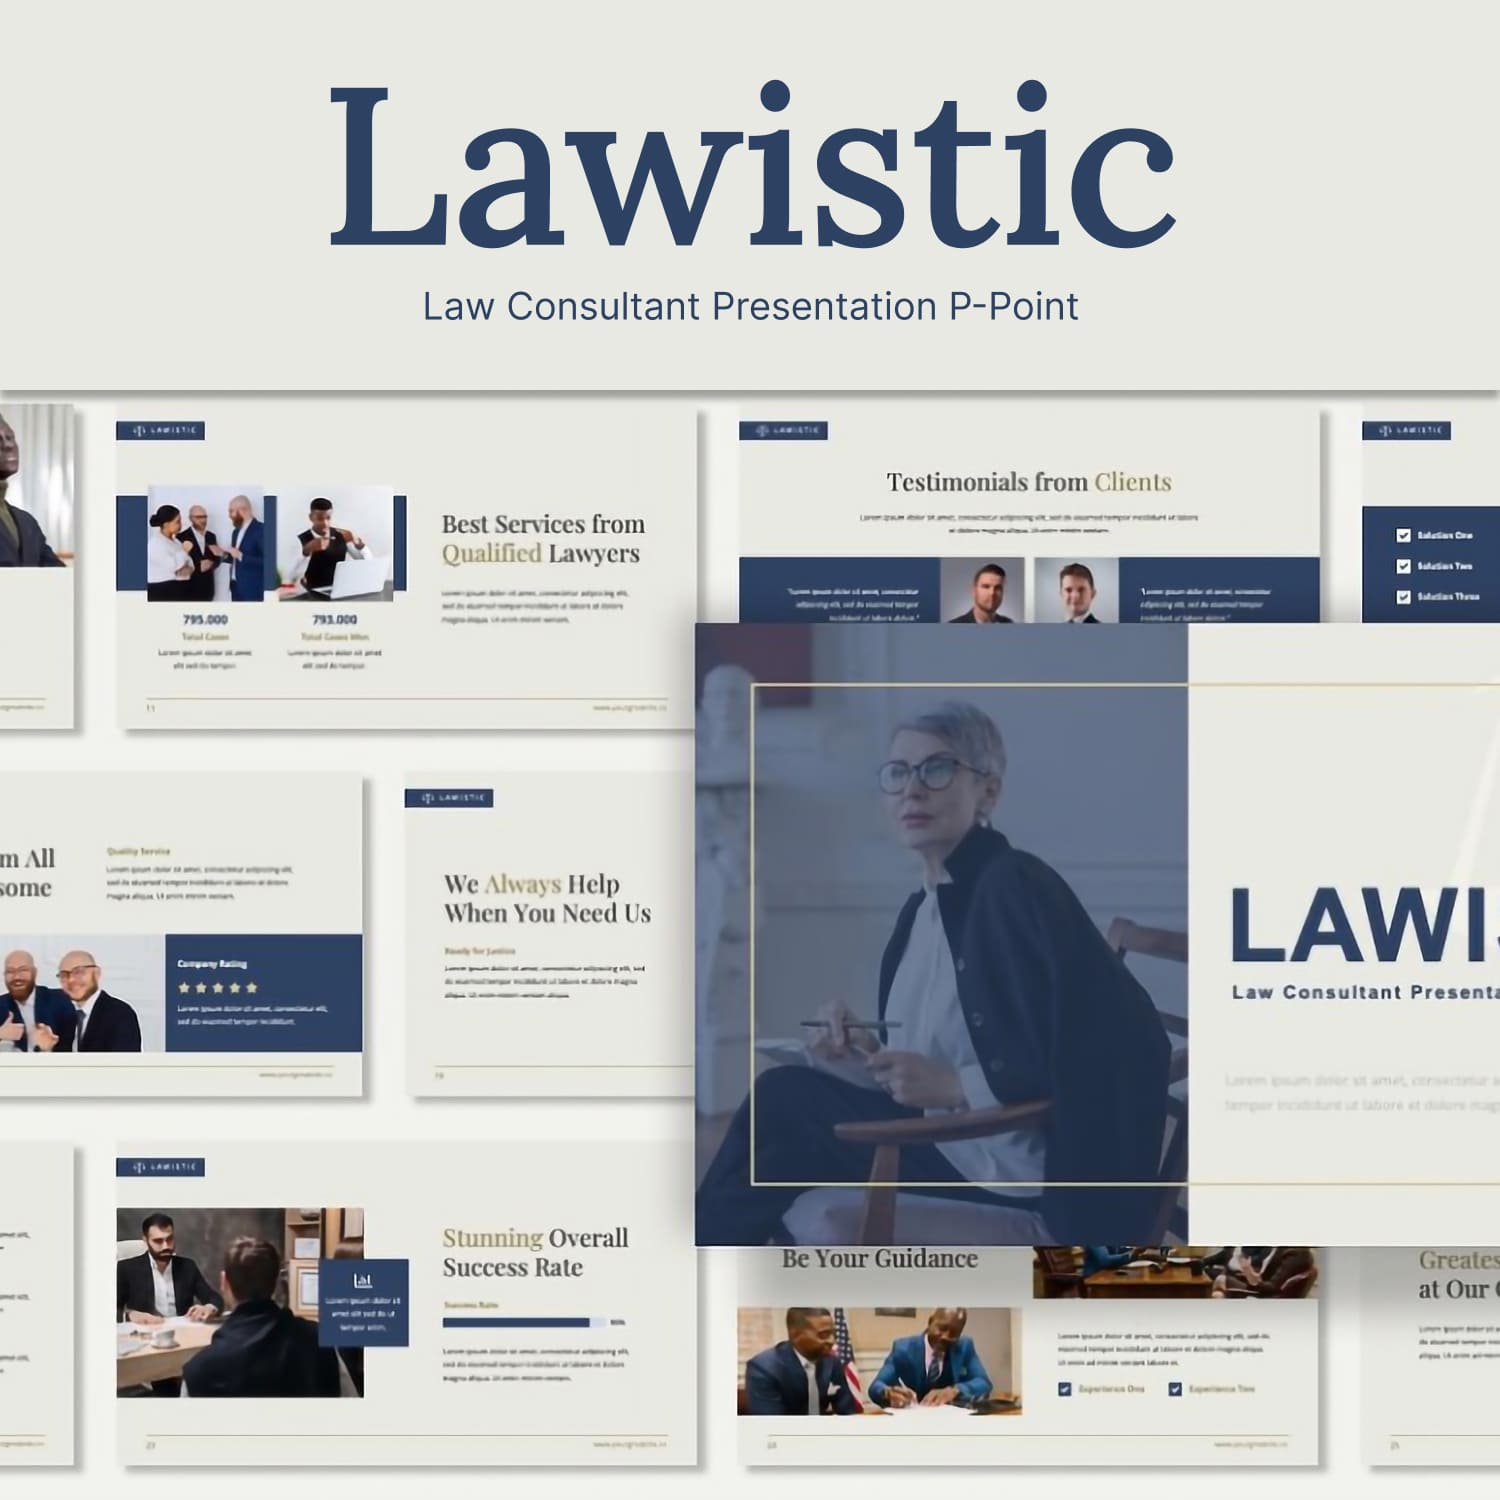 Law Consultant Presentation P-Point cover.